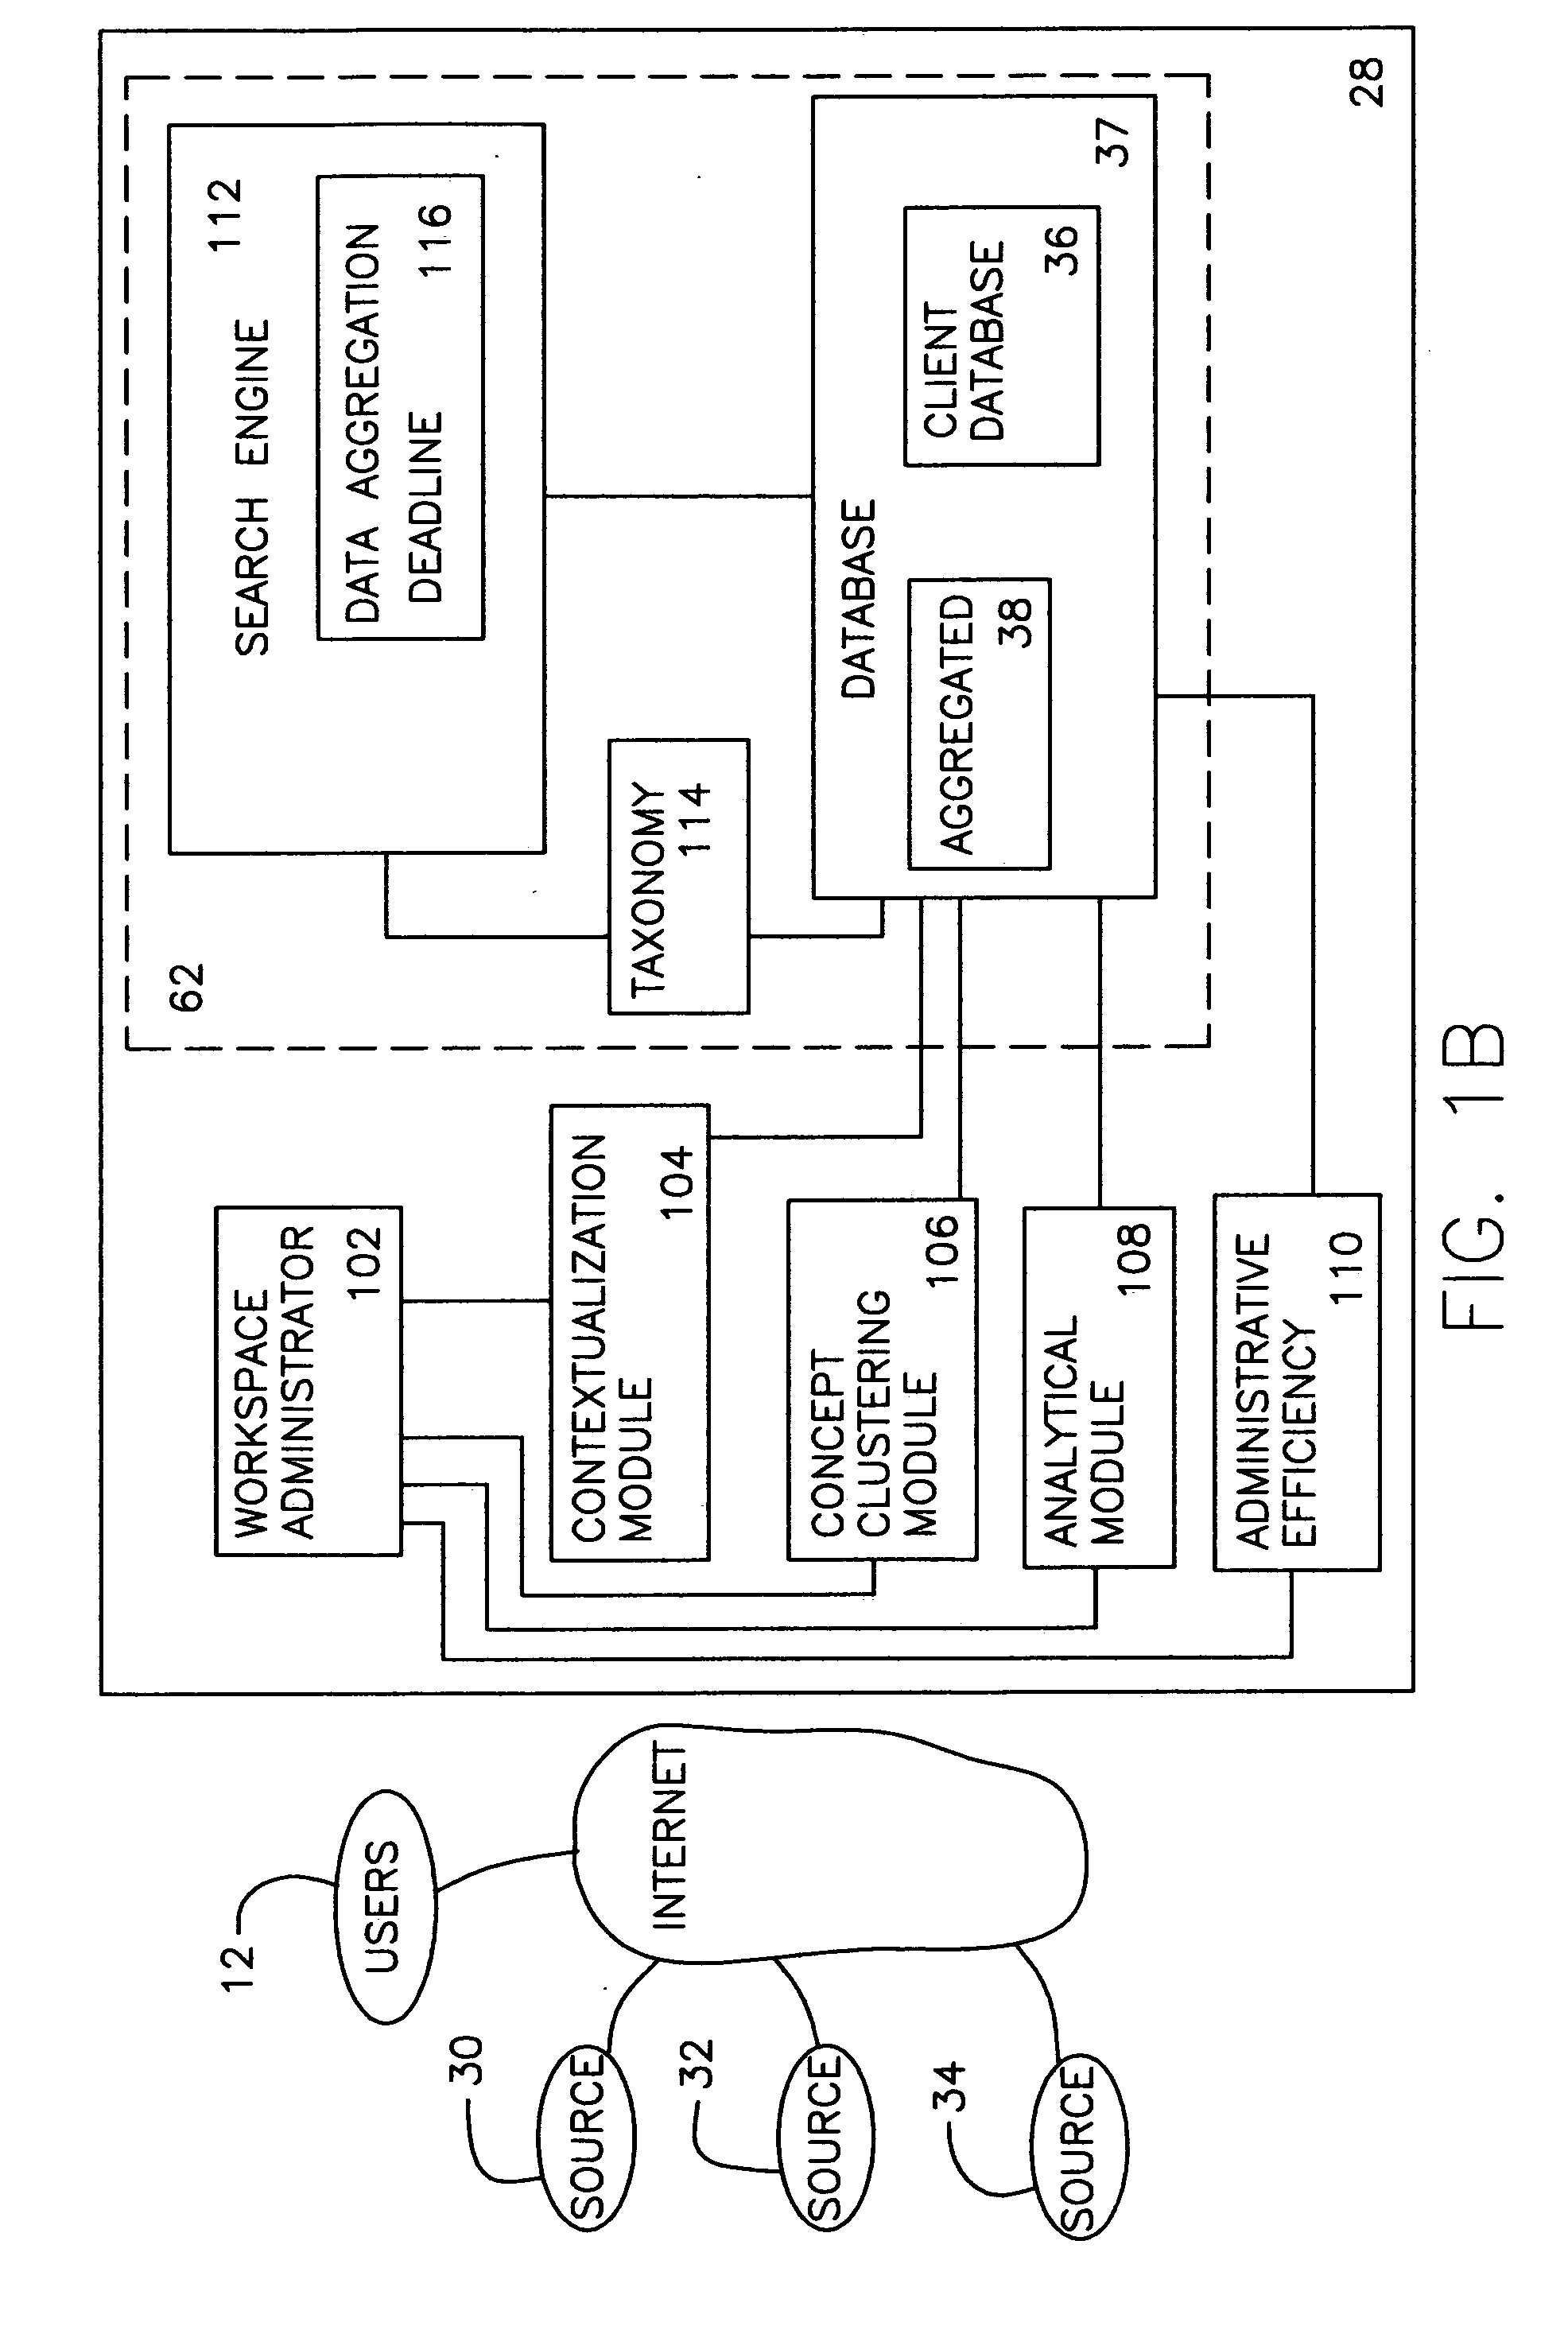 System and method for providing global information on risks and related hedging strategies